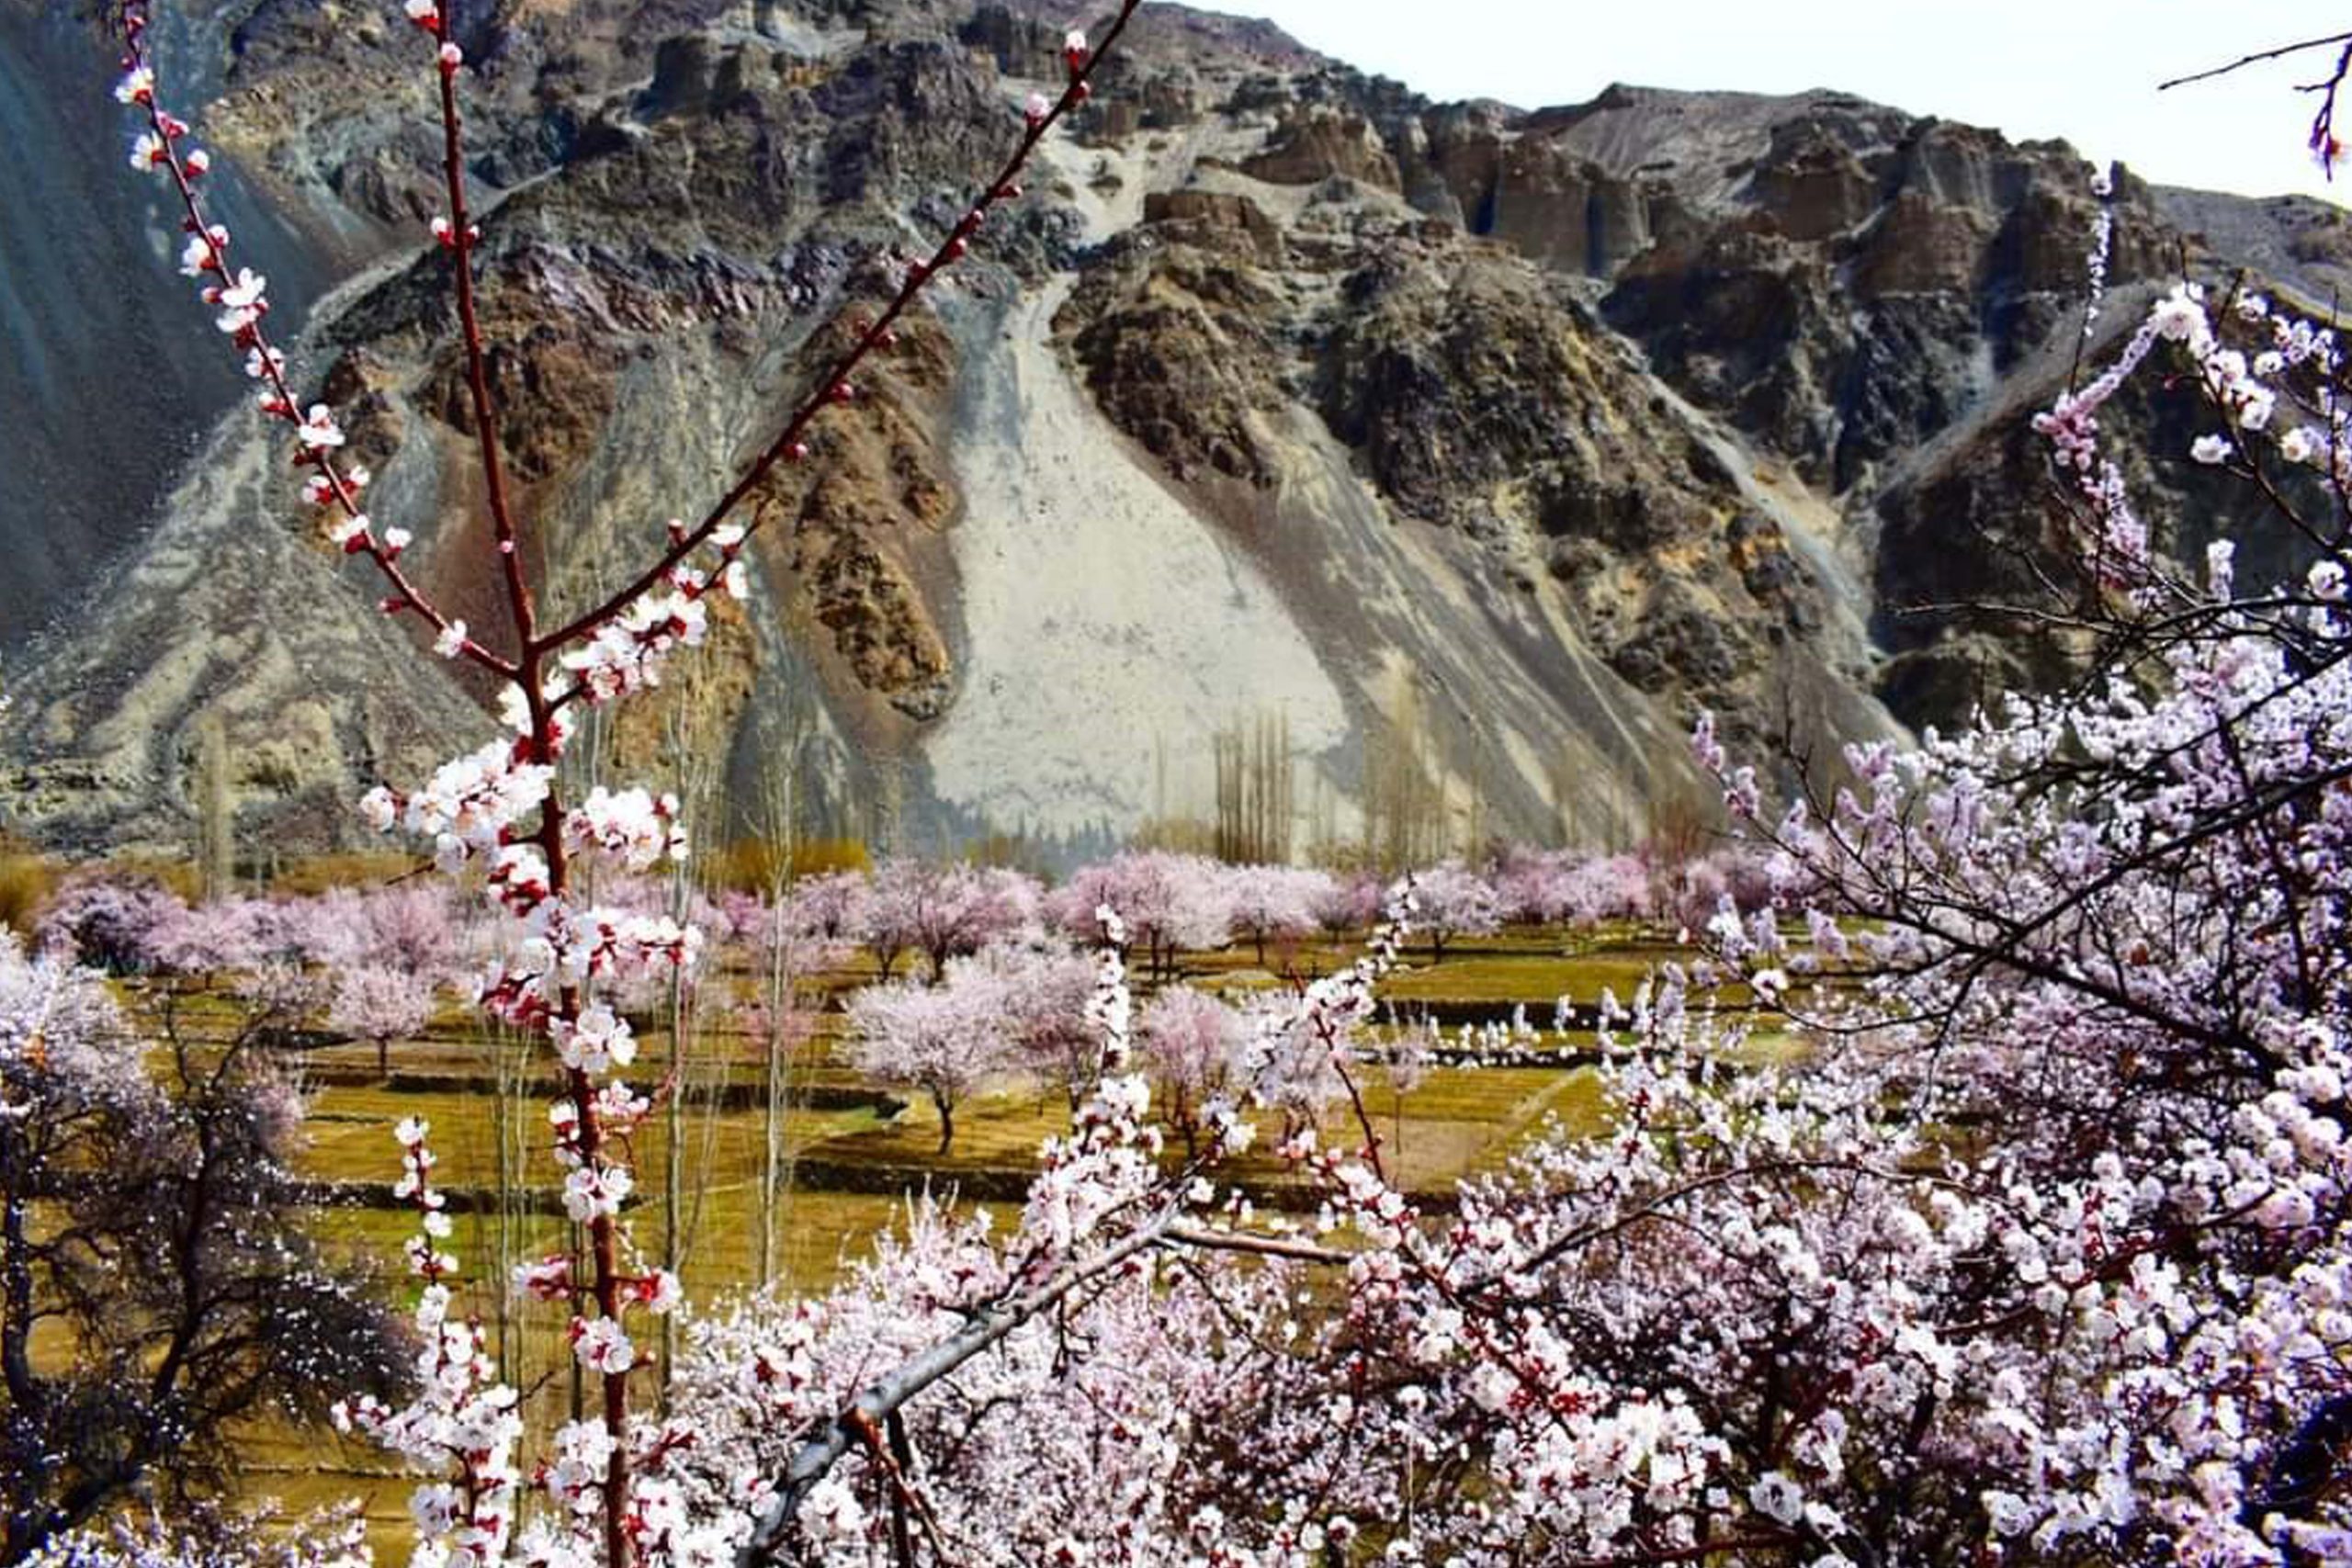 An attractive and eye catching view of apricote blossom blooming to mark the spring session in Nagar northren area of Pakistan